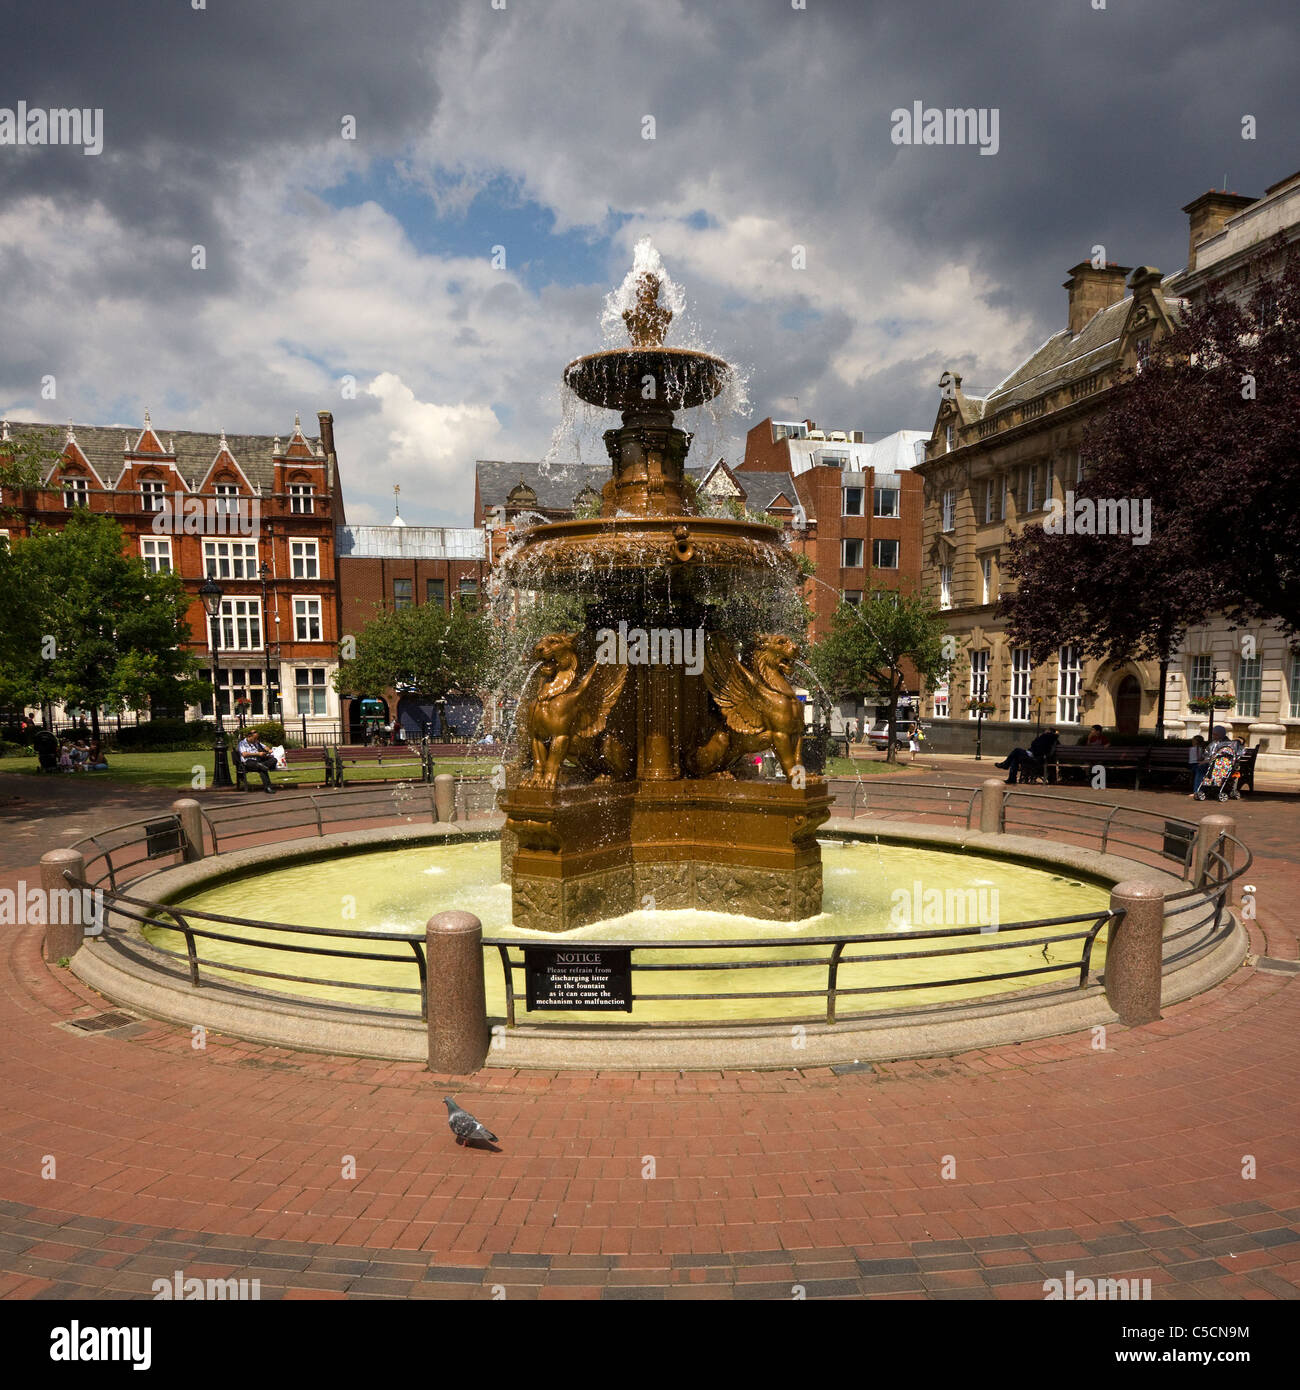 Ornamental water fountain in Town Hall Square, Leicester, England, UK Stock Photo